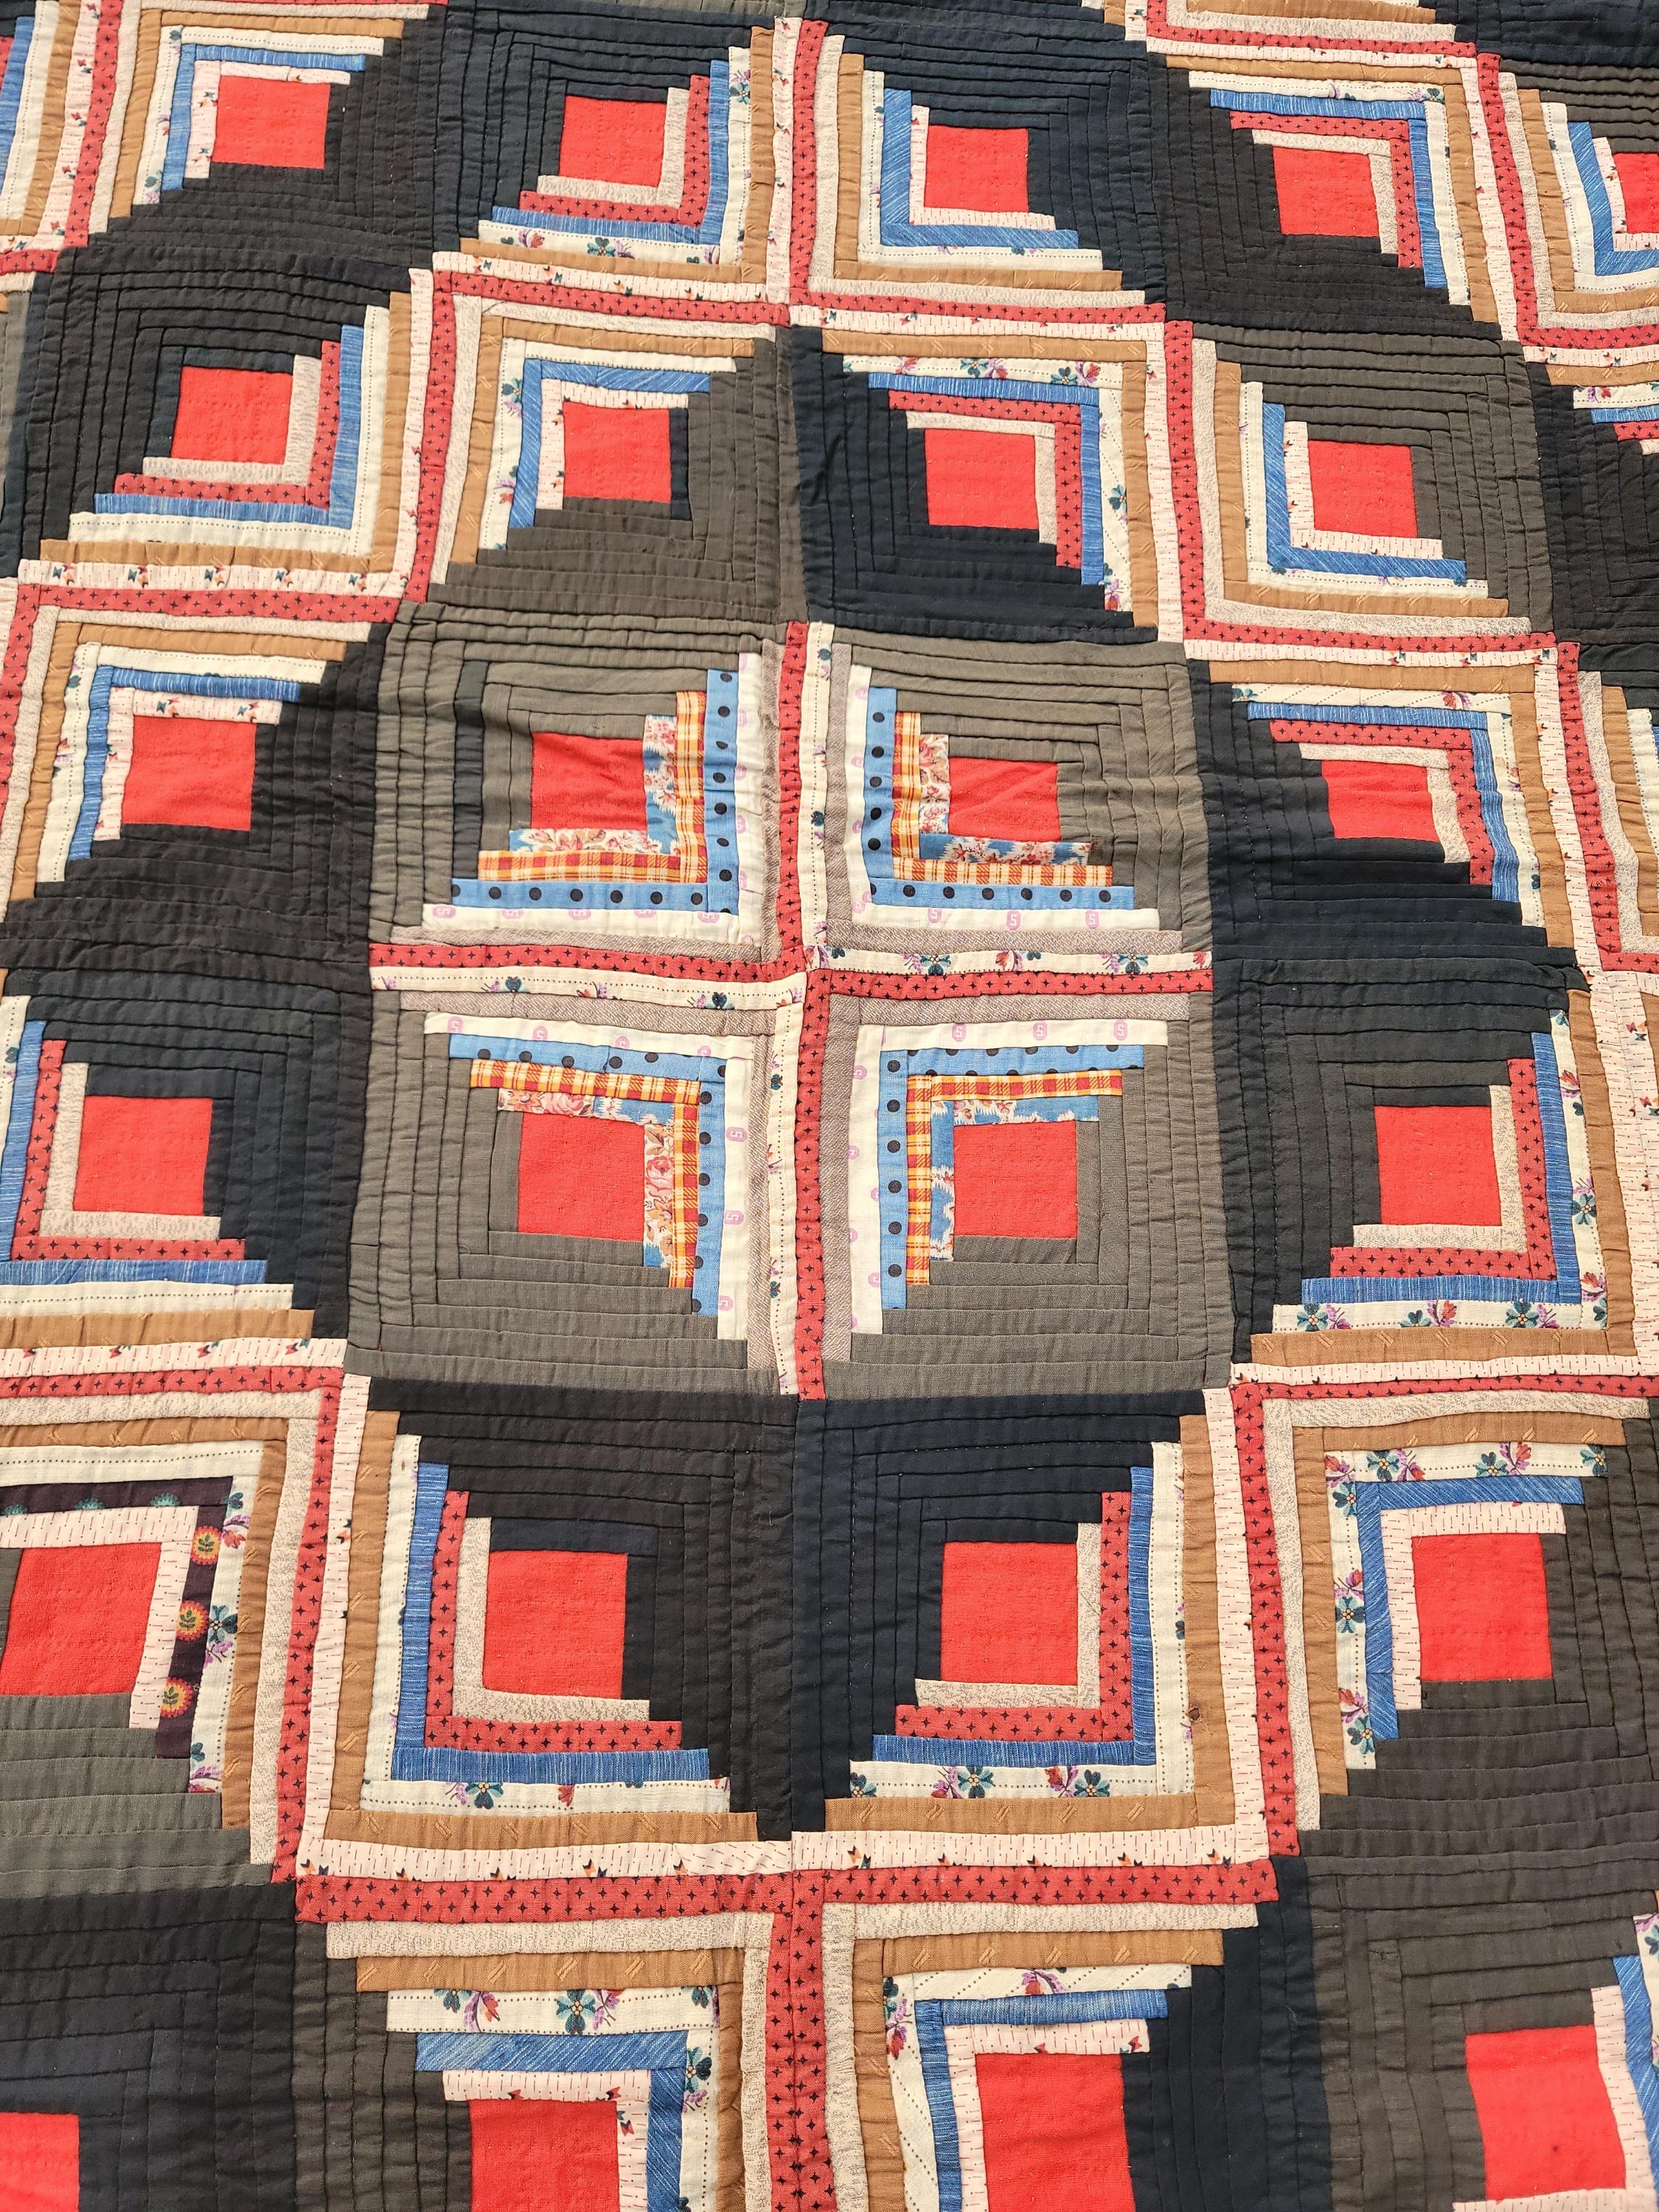 19Thc Wool log cabin quilt or barn raising in fine condition. The backing is in a early brown calico fabric.This was found in Lancaster County,Pennsylvania. The quilt dates from the mid 19thc ( 1860-1870).
This is a real collectors quilt and quite